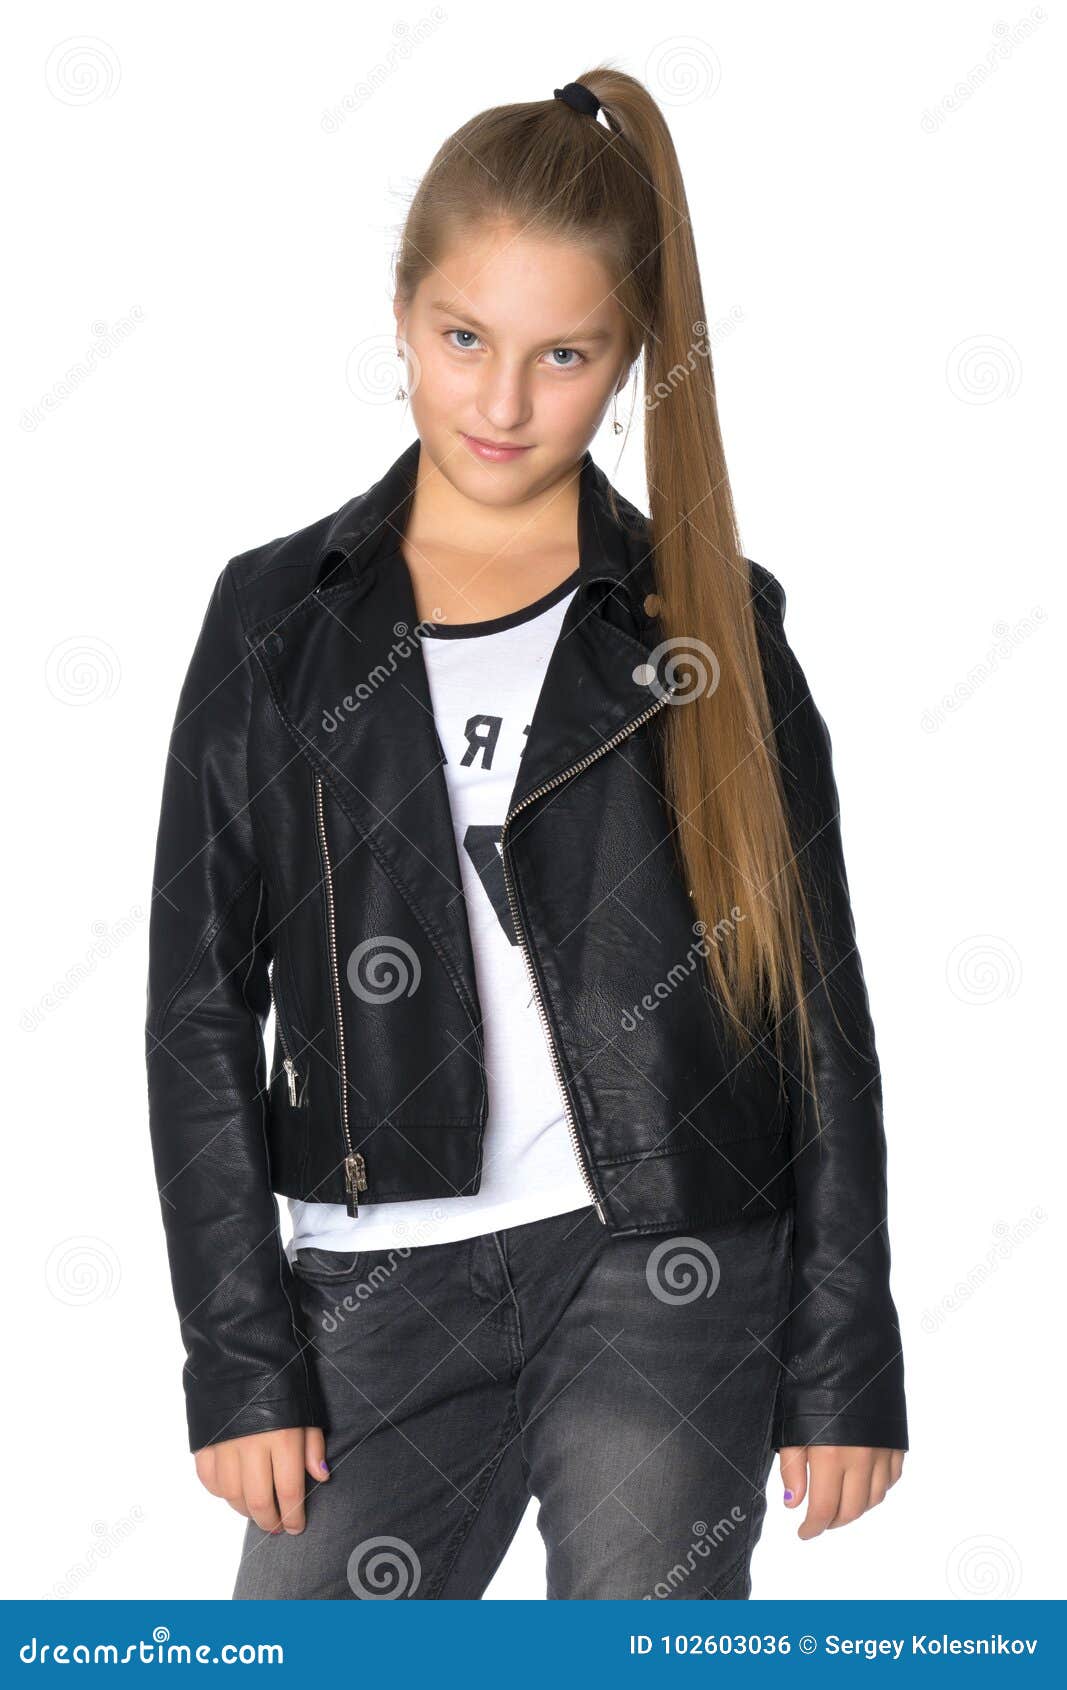 A Teenage Girl In A Leather Jacket And Jeans. Stock Photo - Image of ...